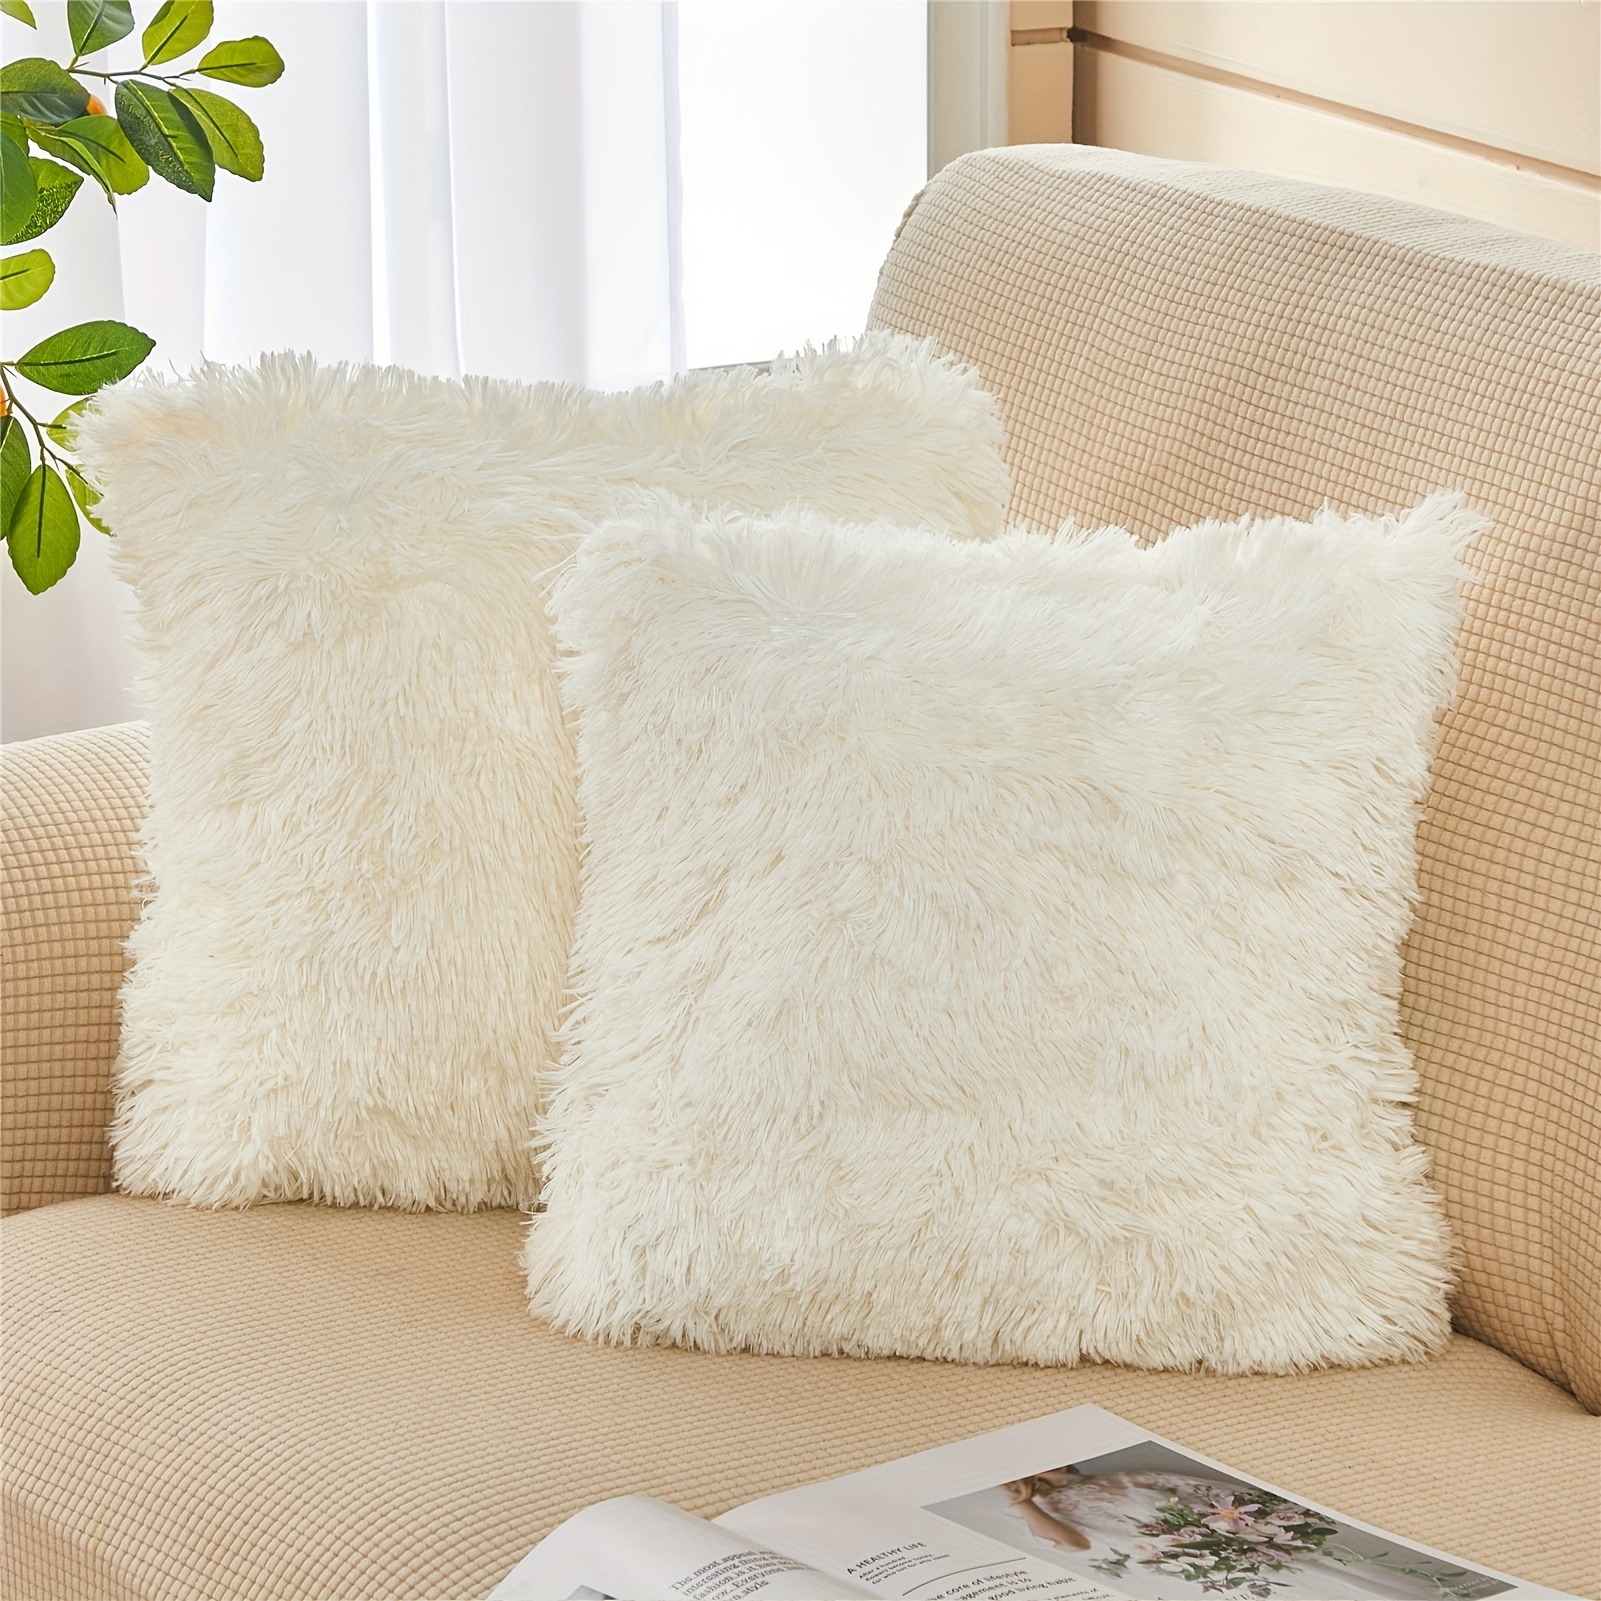 Top Finel Cream White Decorative Throw Pillow Covers 18 x 18,Soft Couch Living Room Sofa Velvet Cushion Case Pack of 2,Christmas Home Decor for